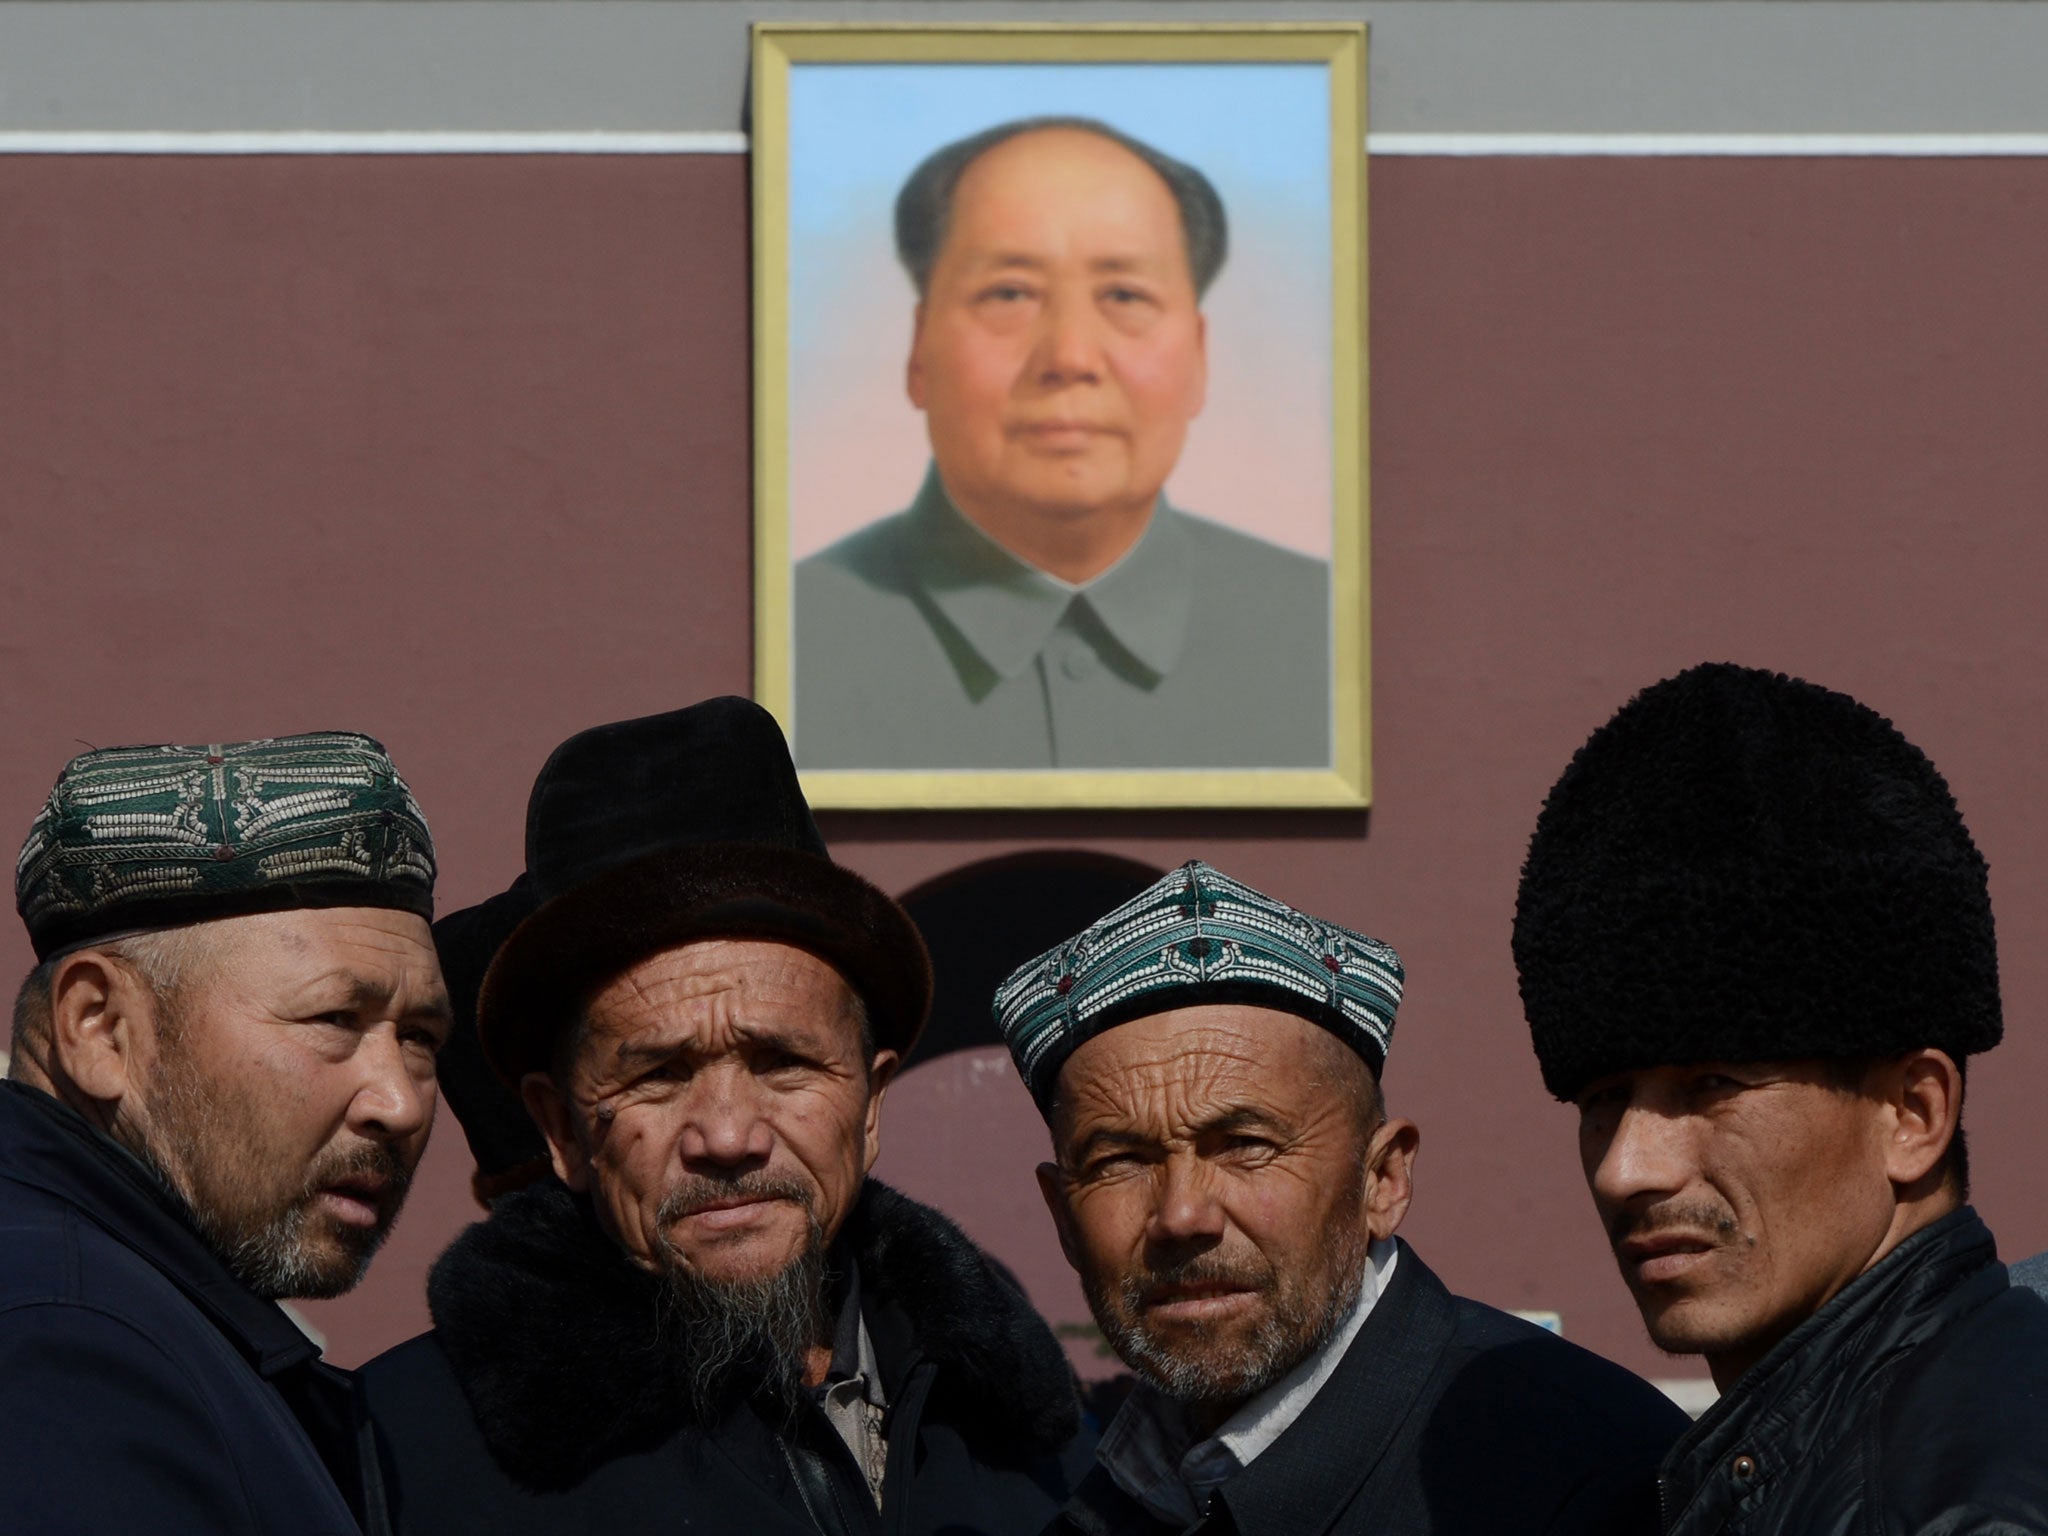 Chinese muslims known as 'Uighurs' from Xinjiang Province pose for photos in front of a portrait of Mao Zedong before the opening session of the Chinese People's Political Consultative Conference (CPPCC) at the Great Hall of the People in Beijing on March 3, 2013